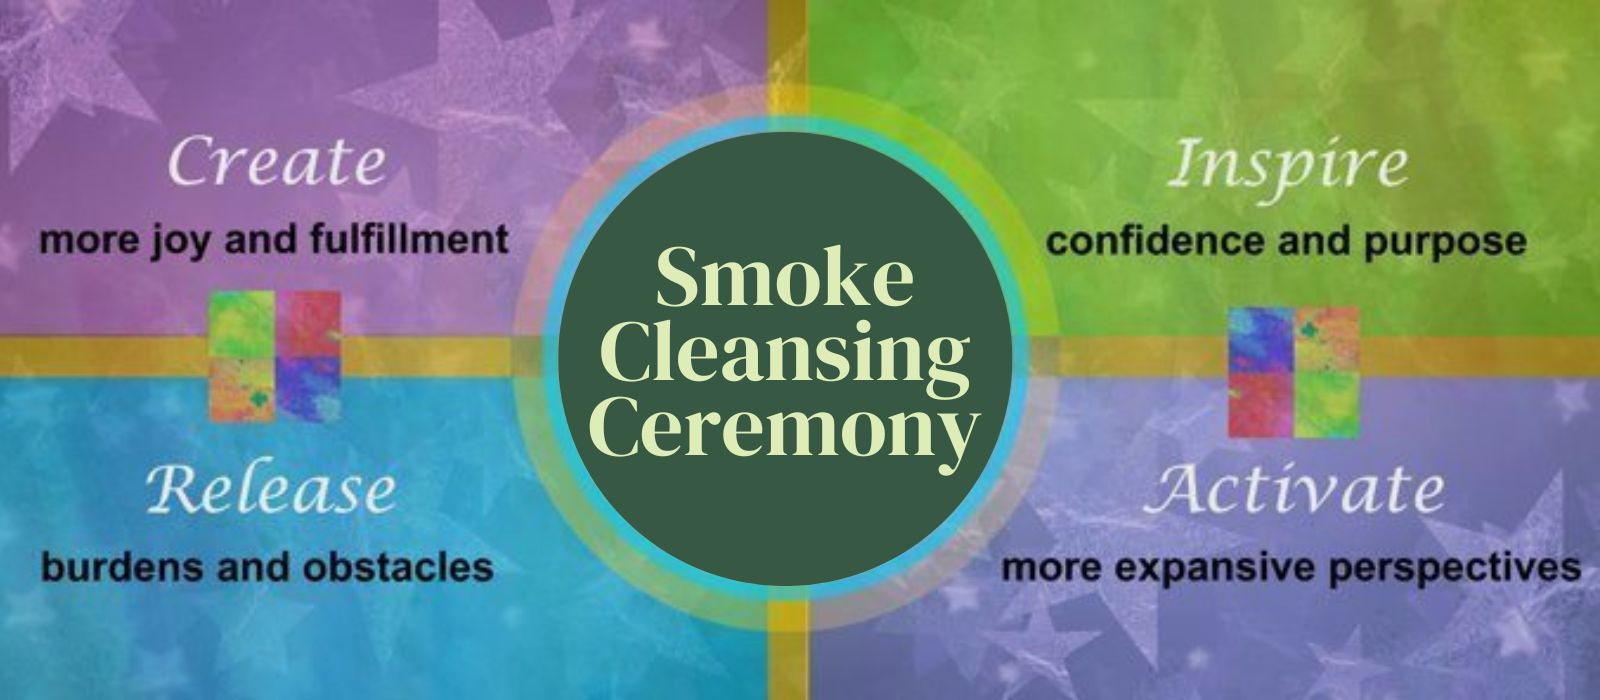 Smoke Cleansing Ceremony